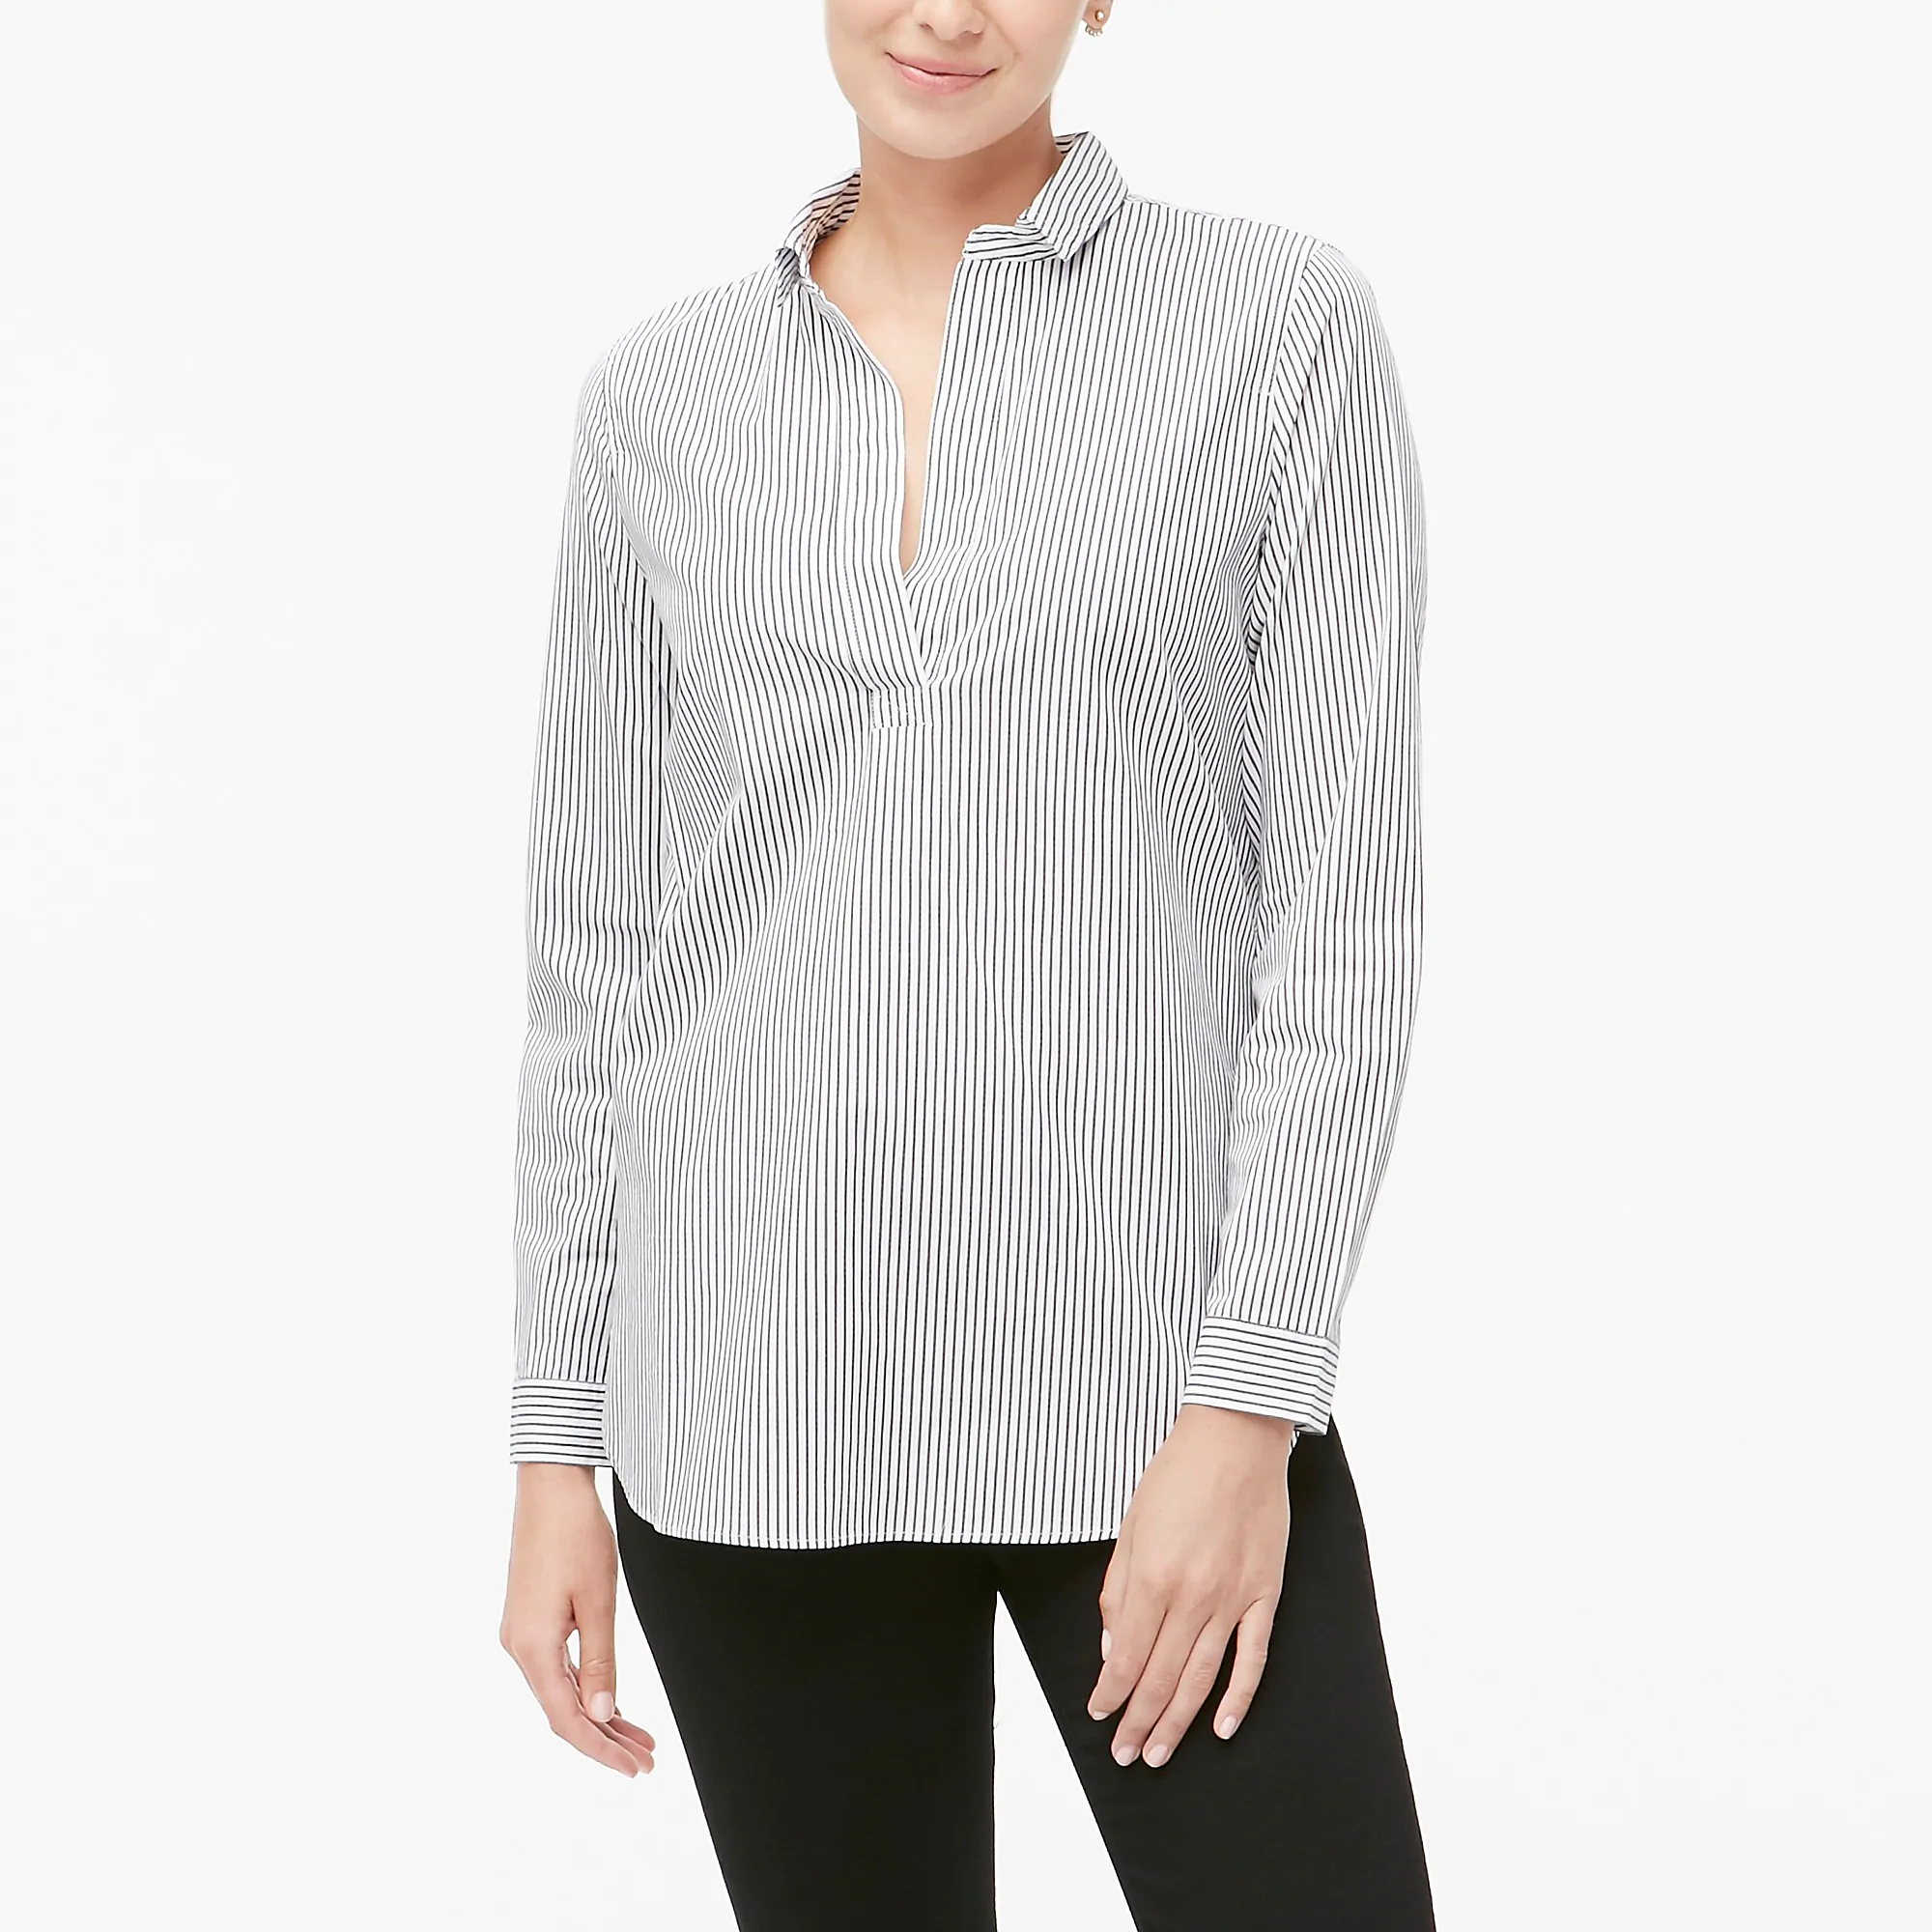 Petite high-low popover tunic top